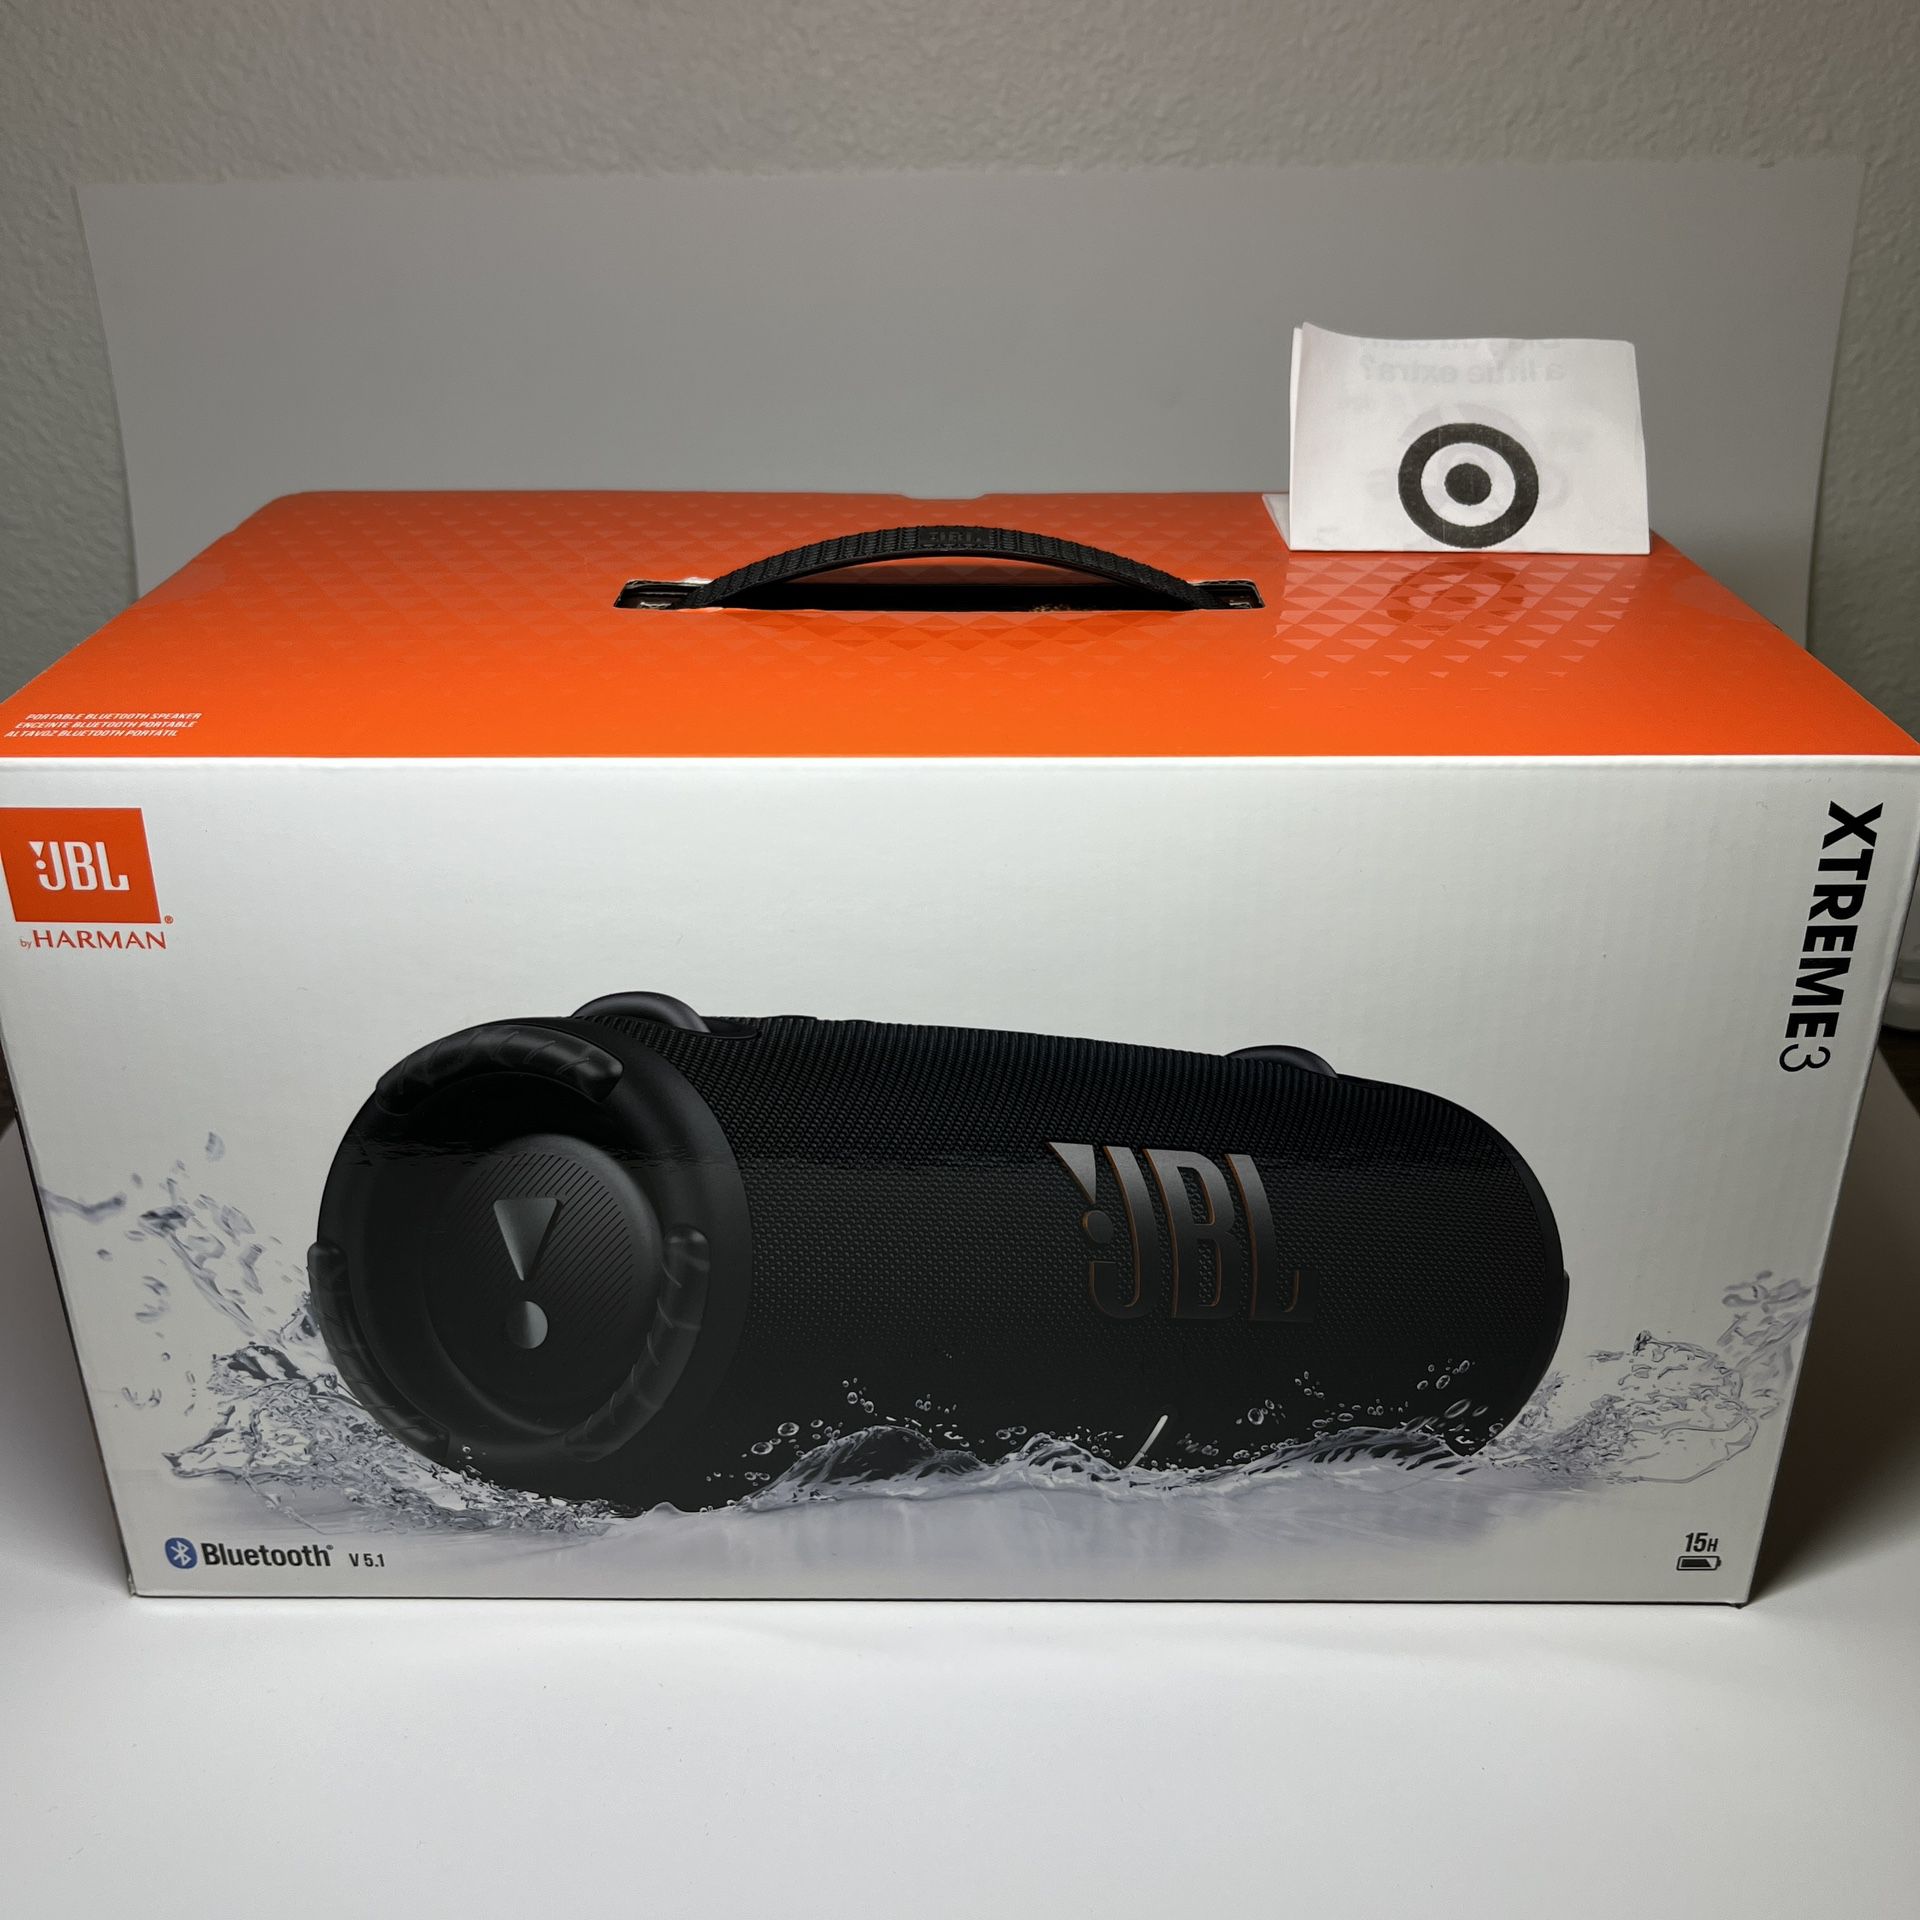 Brand New JBL Extreme 3 Waterproof Bluetooth Speakers with Powerbank and Original Receipt 